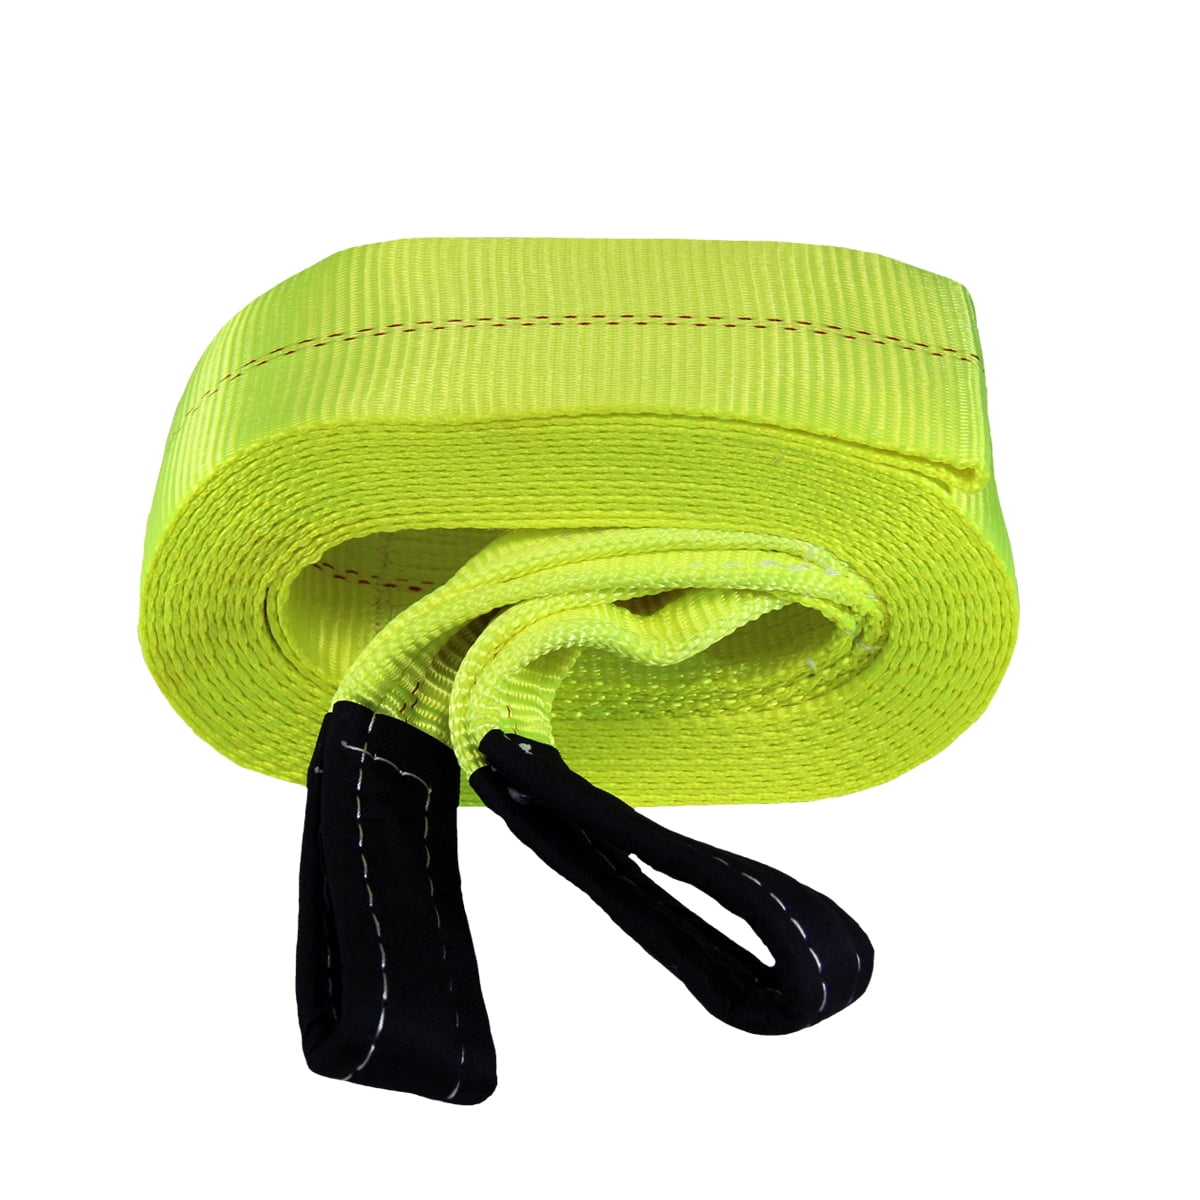 20 Foot 10 000lb ATV Recovery Tow Strap Cable Rope With Hooks for sale online 